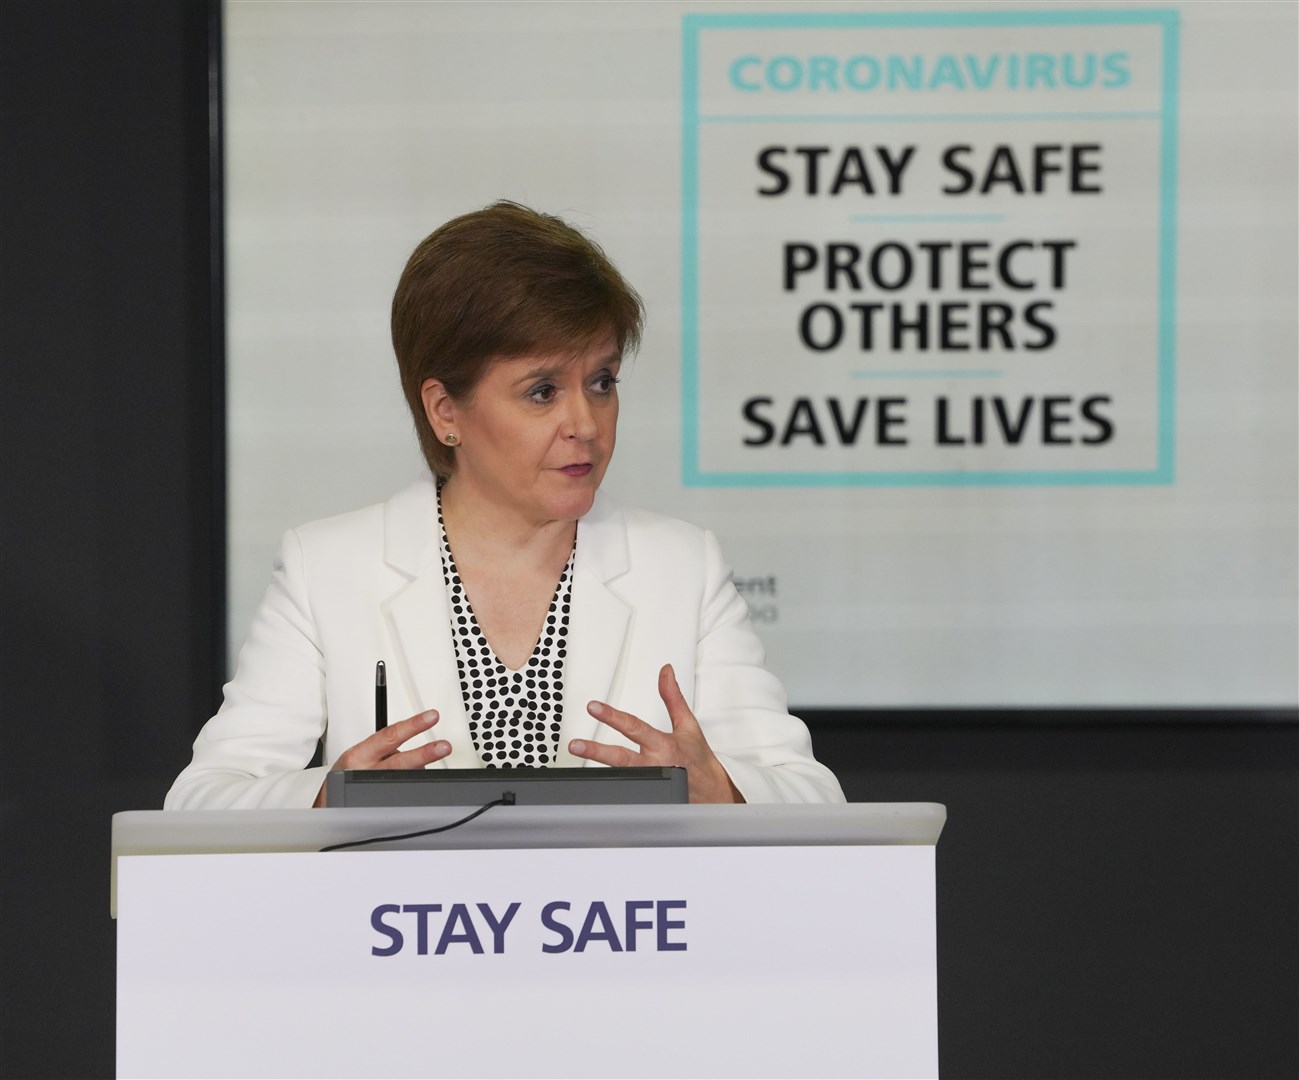 Nicola Sturgeon said the outbreak in Aberdeen proved the need to remain vigilant.